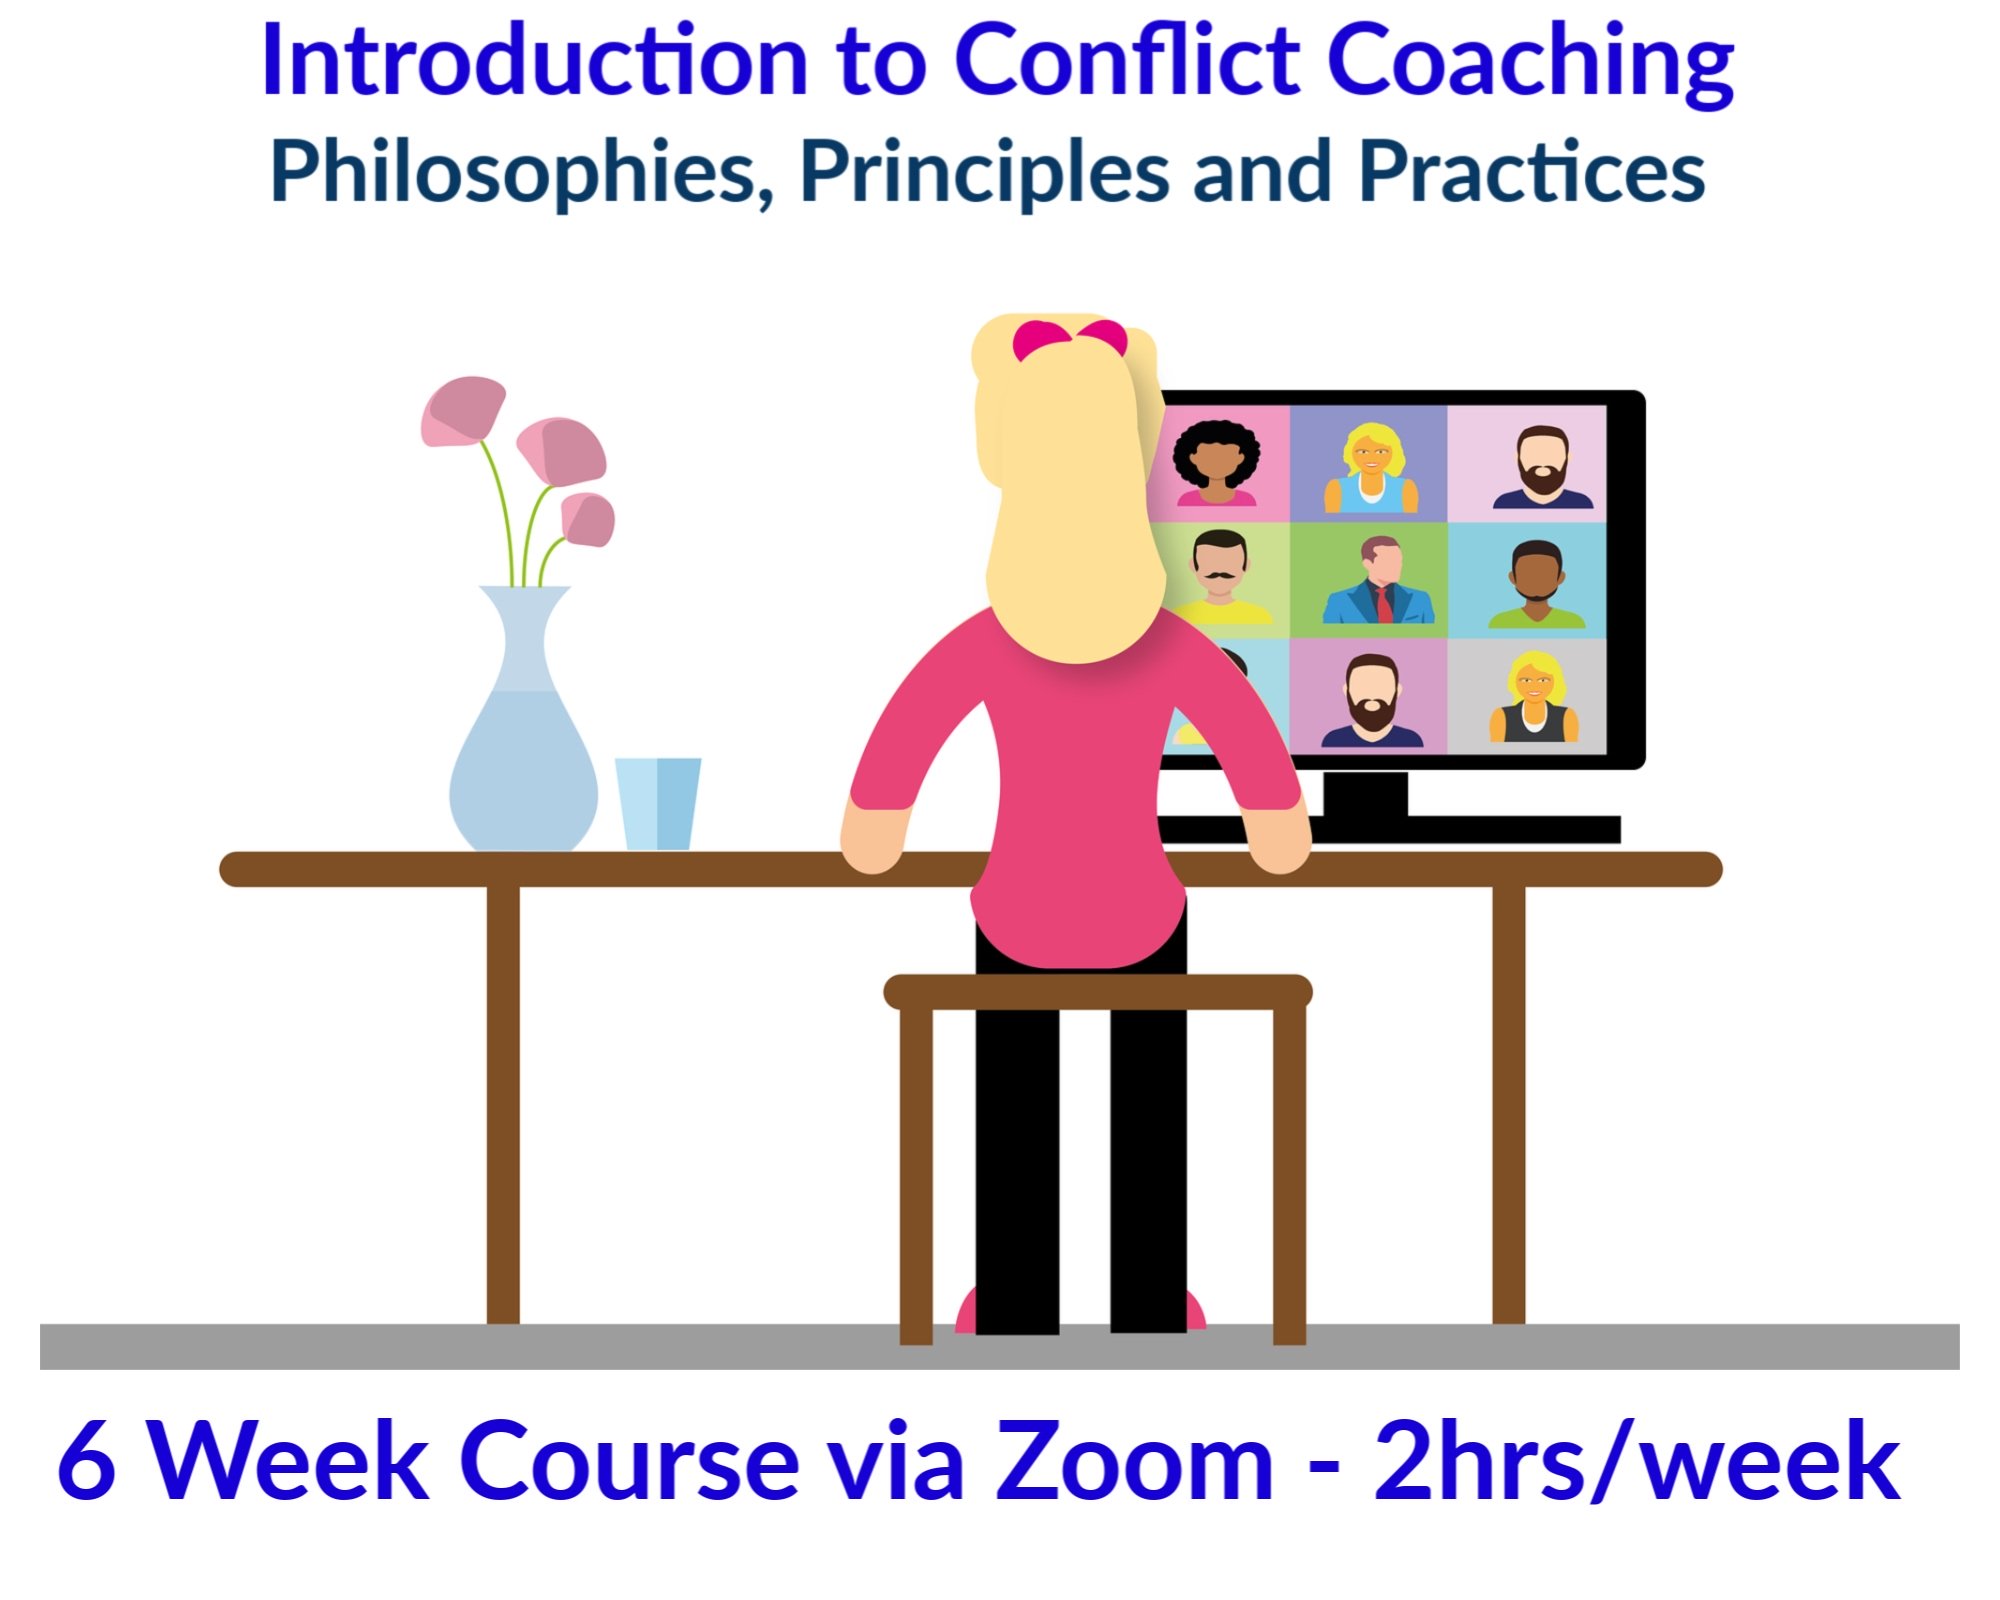 Online Conflict Coaching Skills Introductory Training Course.